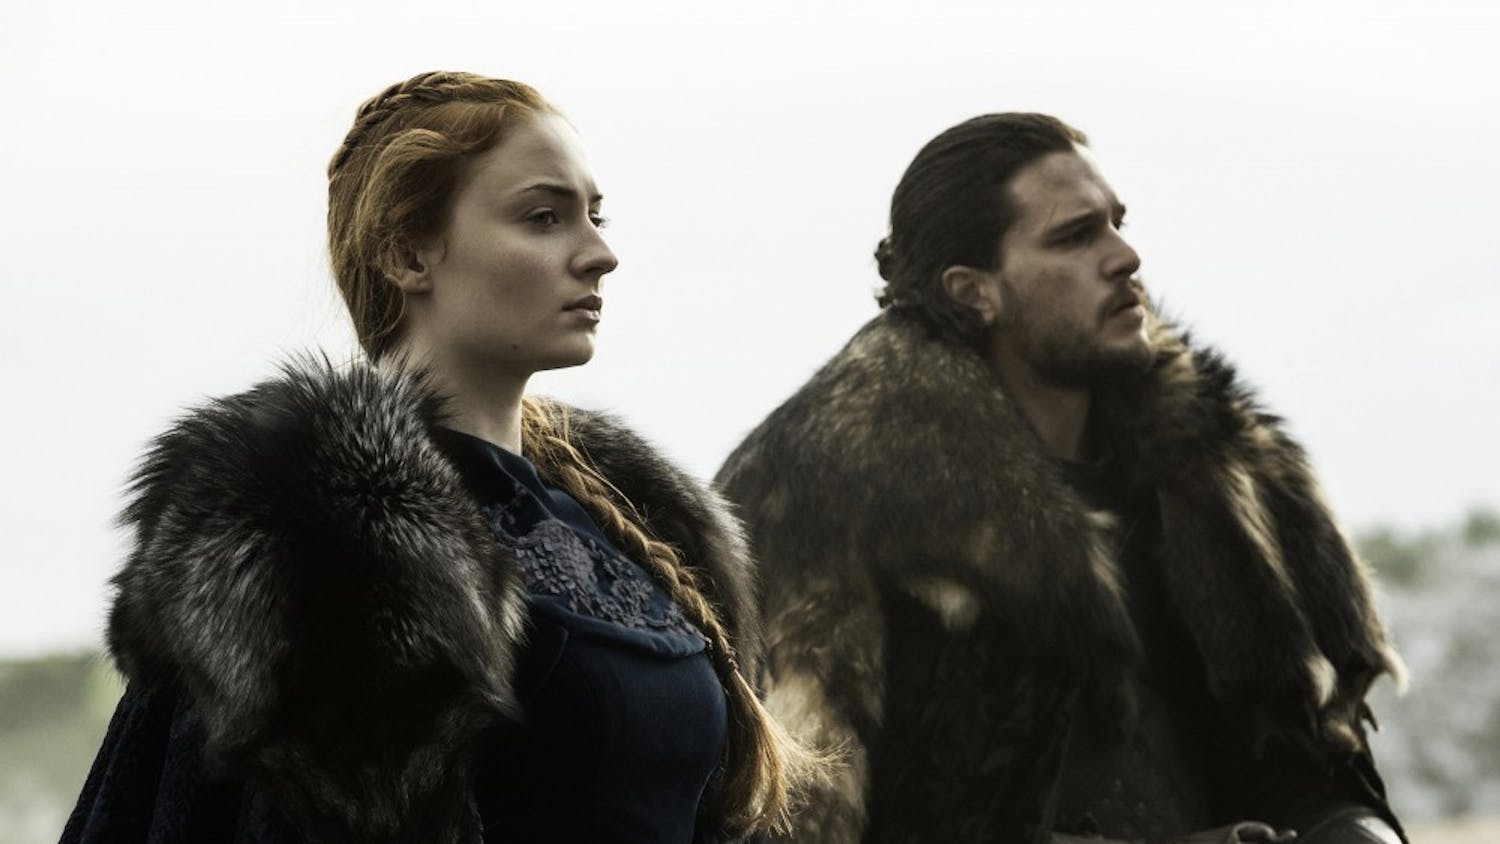 Sophie Turner and Kit Harington as Sansa Stark and Jon Snow in season six of “Game of Thrones,” which received the most nominations of any show this year with 23, including Outstanding Drama Series.&nbsp;